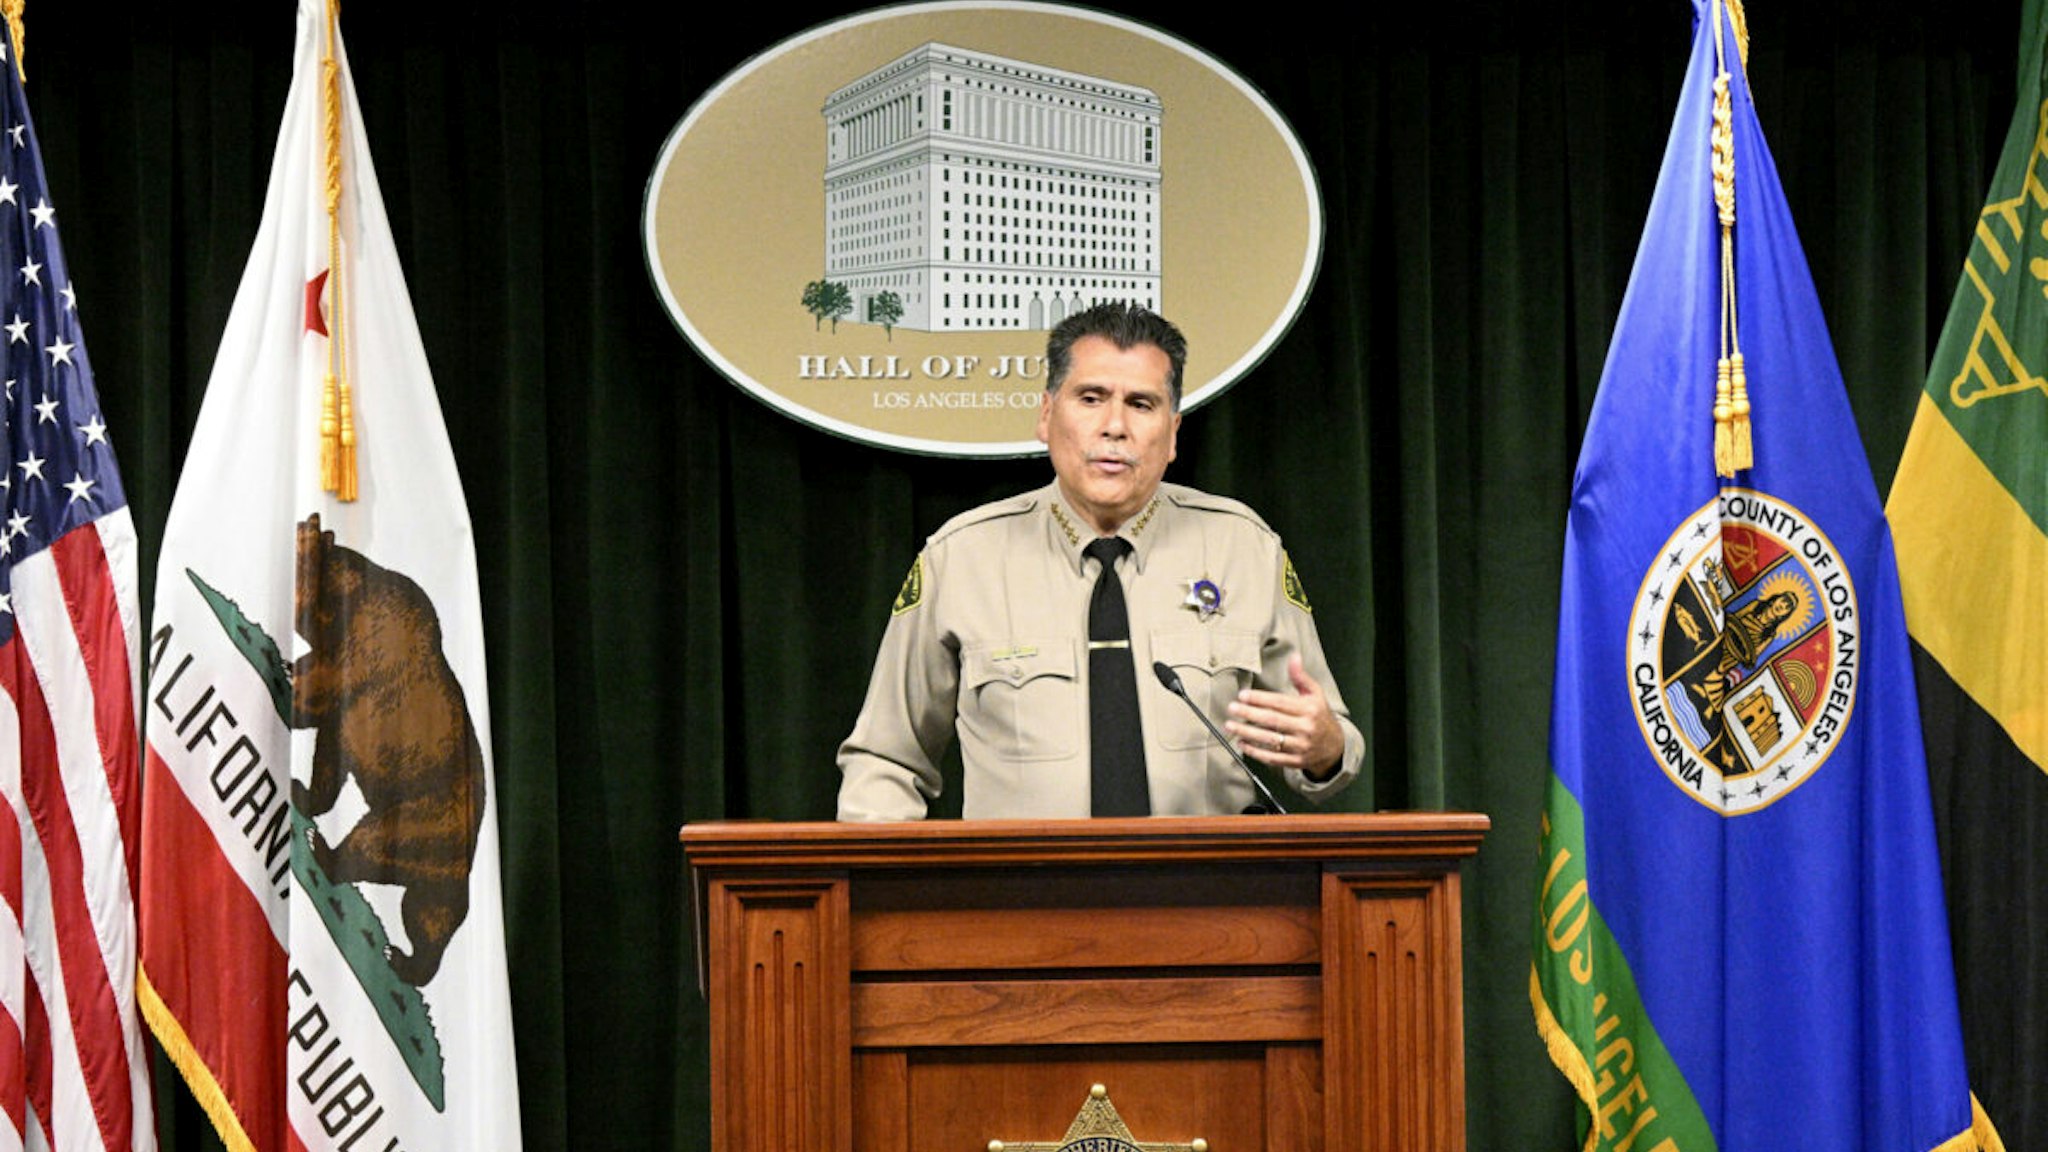 Sheriff Robert Luna speaks during a press conference in Los Angeles